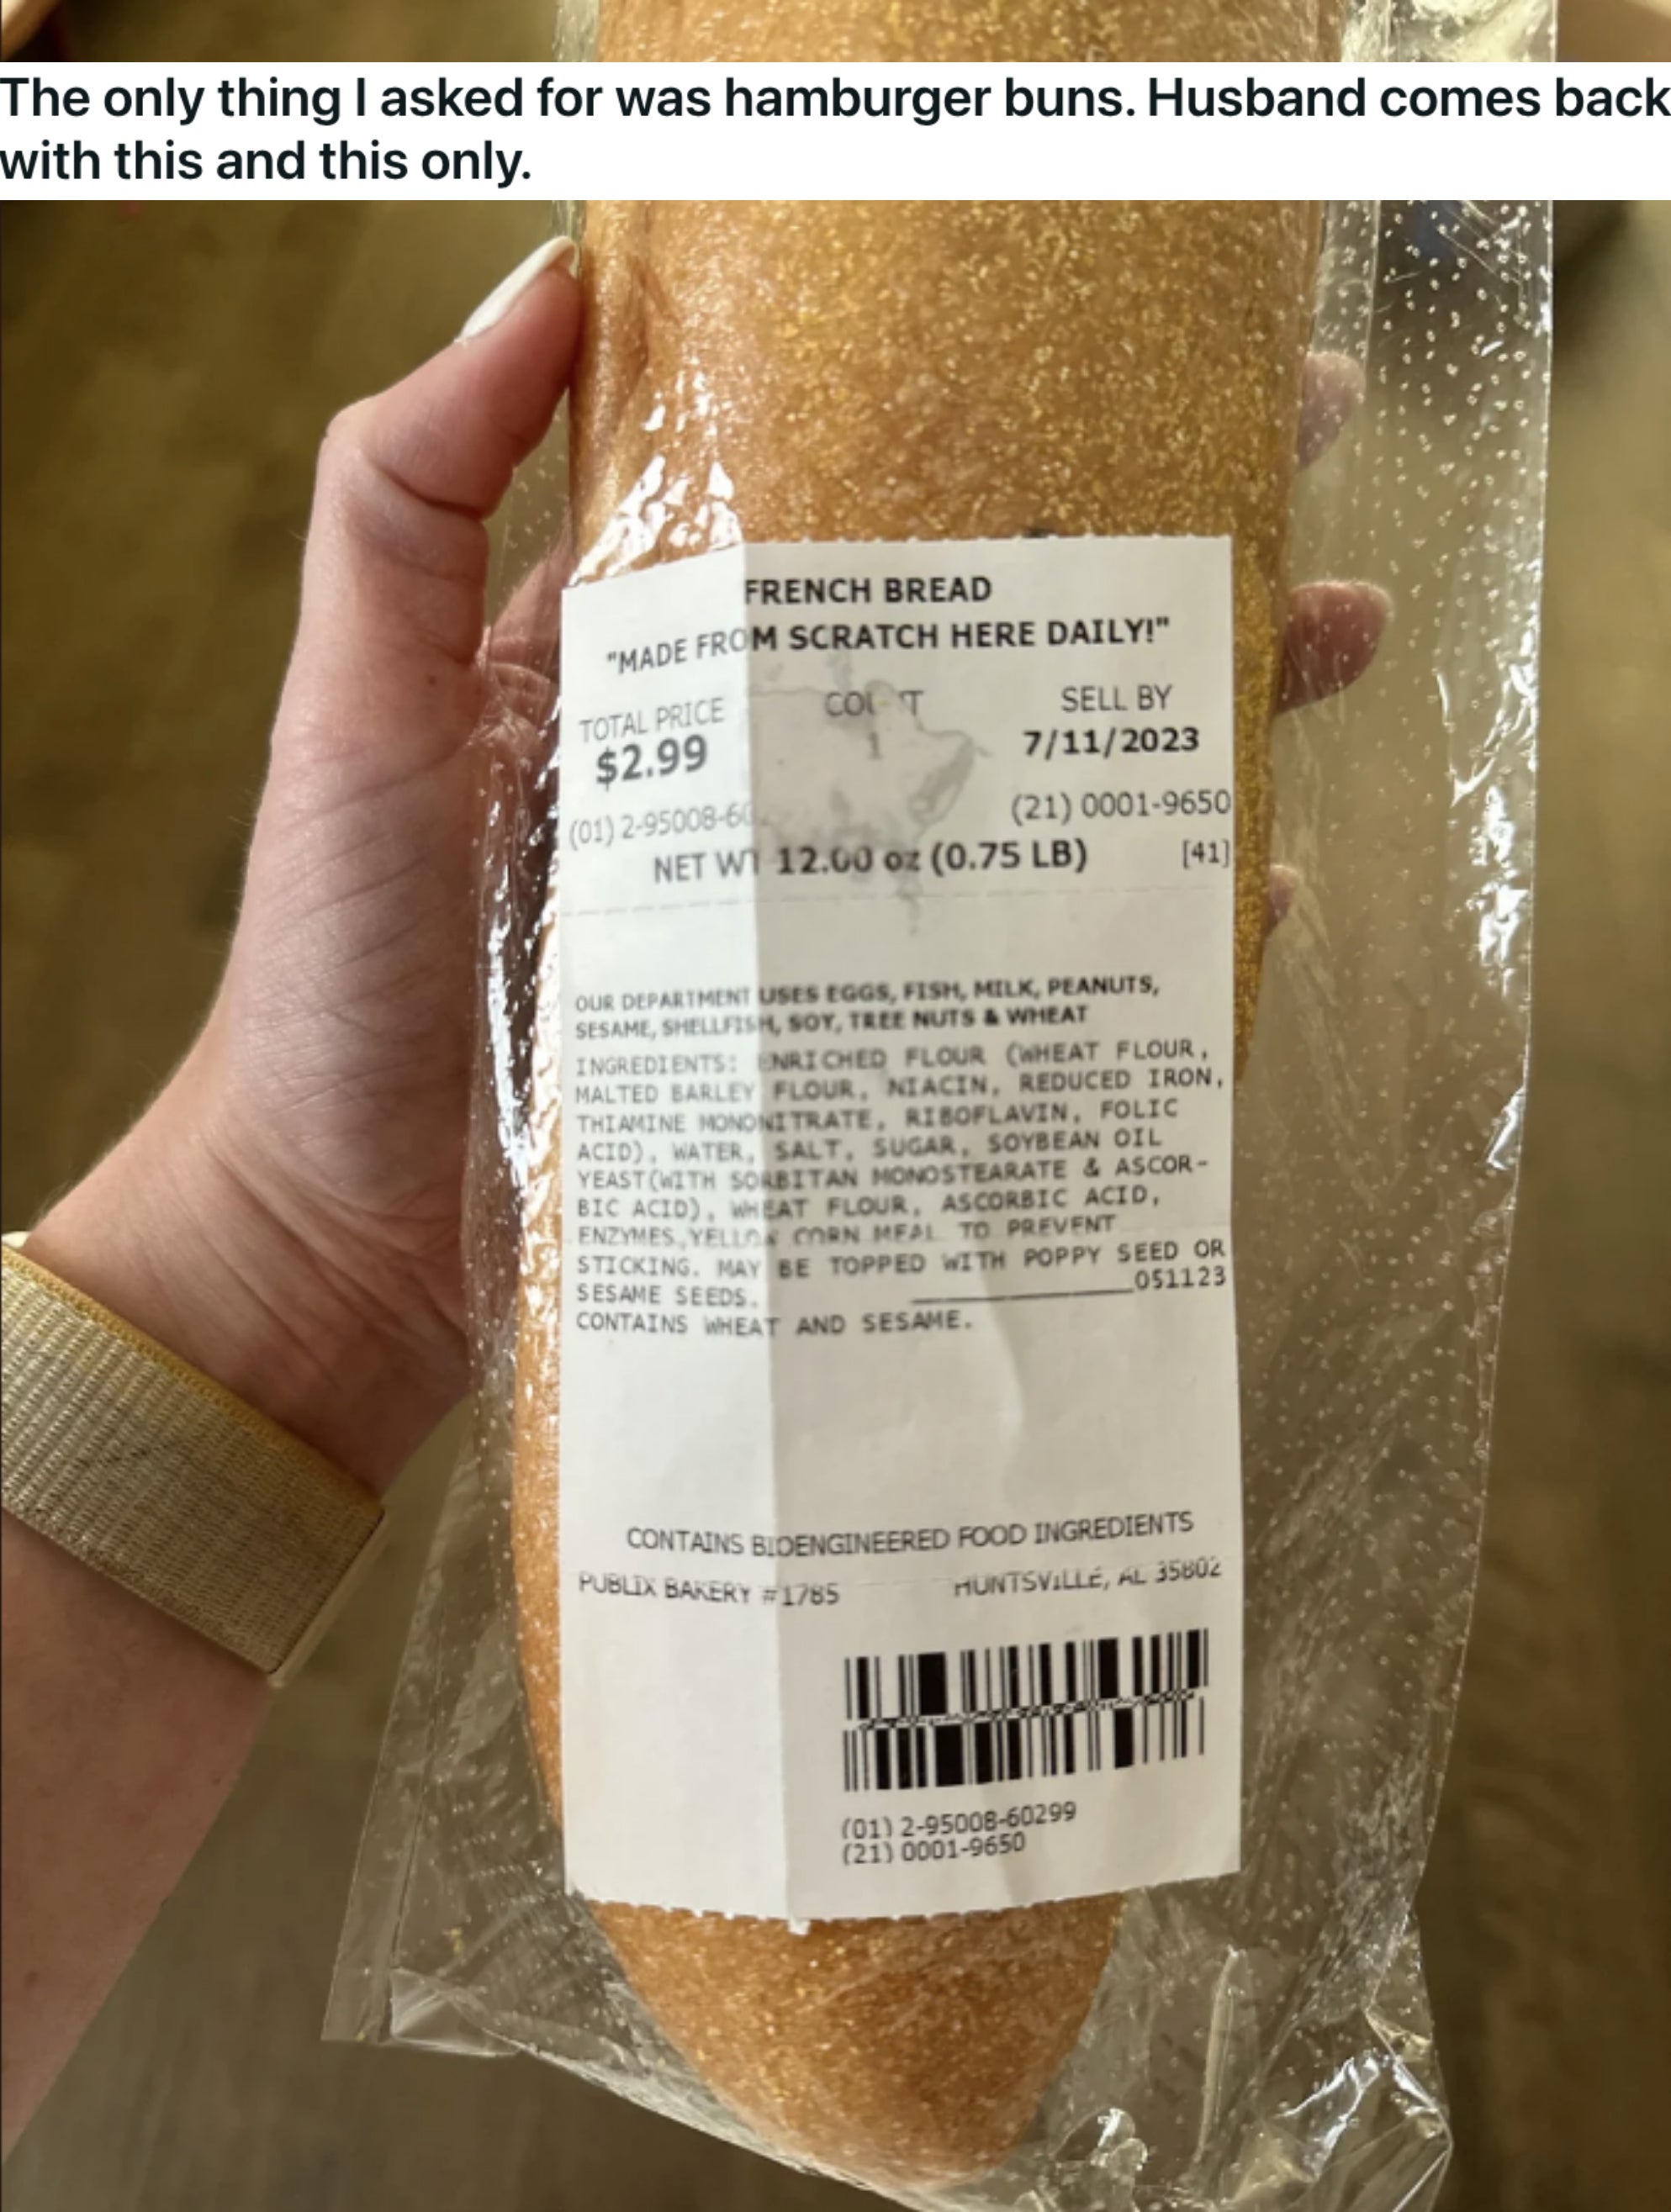 a package of French bread